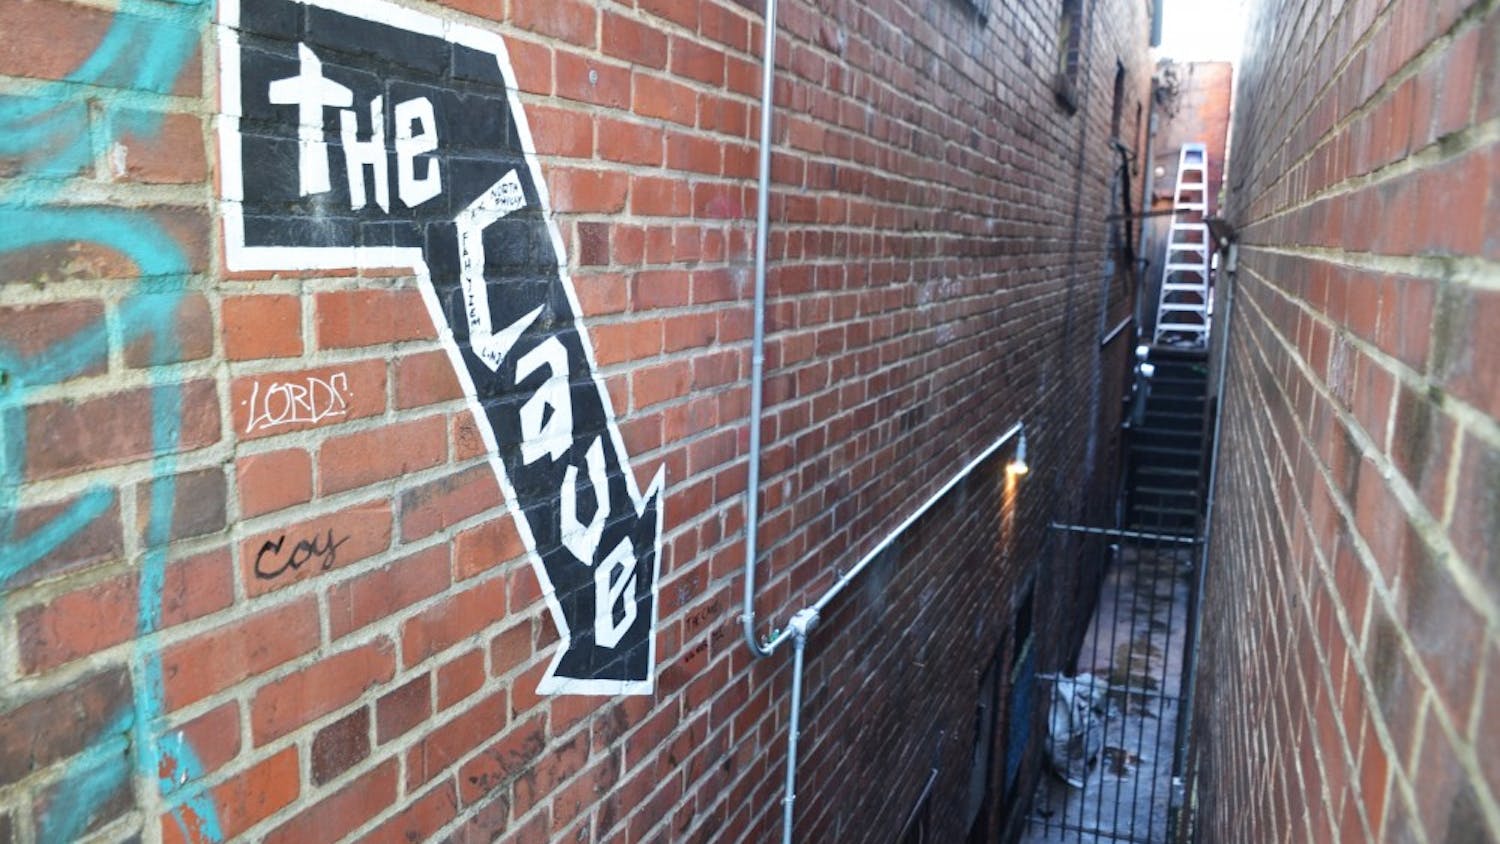 The Cave, a bar on West Franklin St., is set to re-open in June 2018 under new ownership.